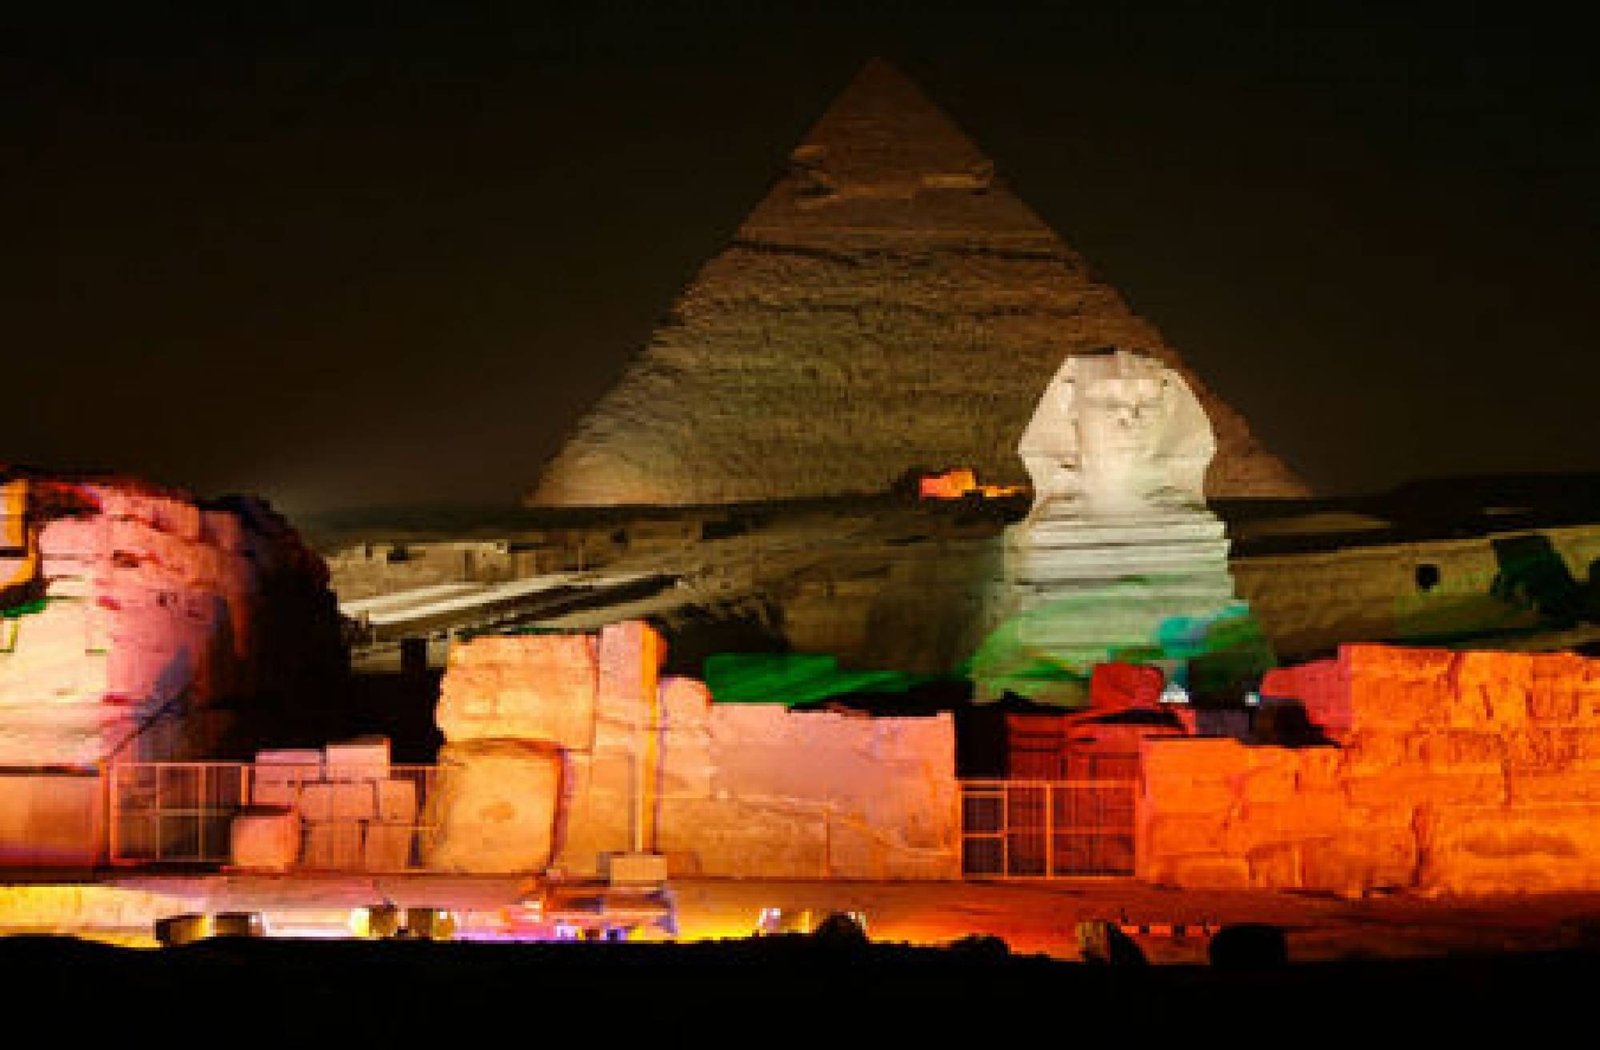 Sound and Light Show At The Pyramids